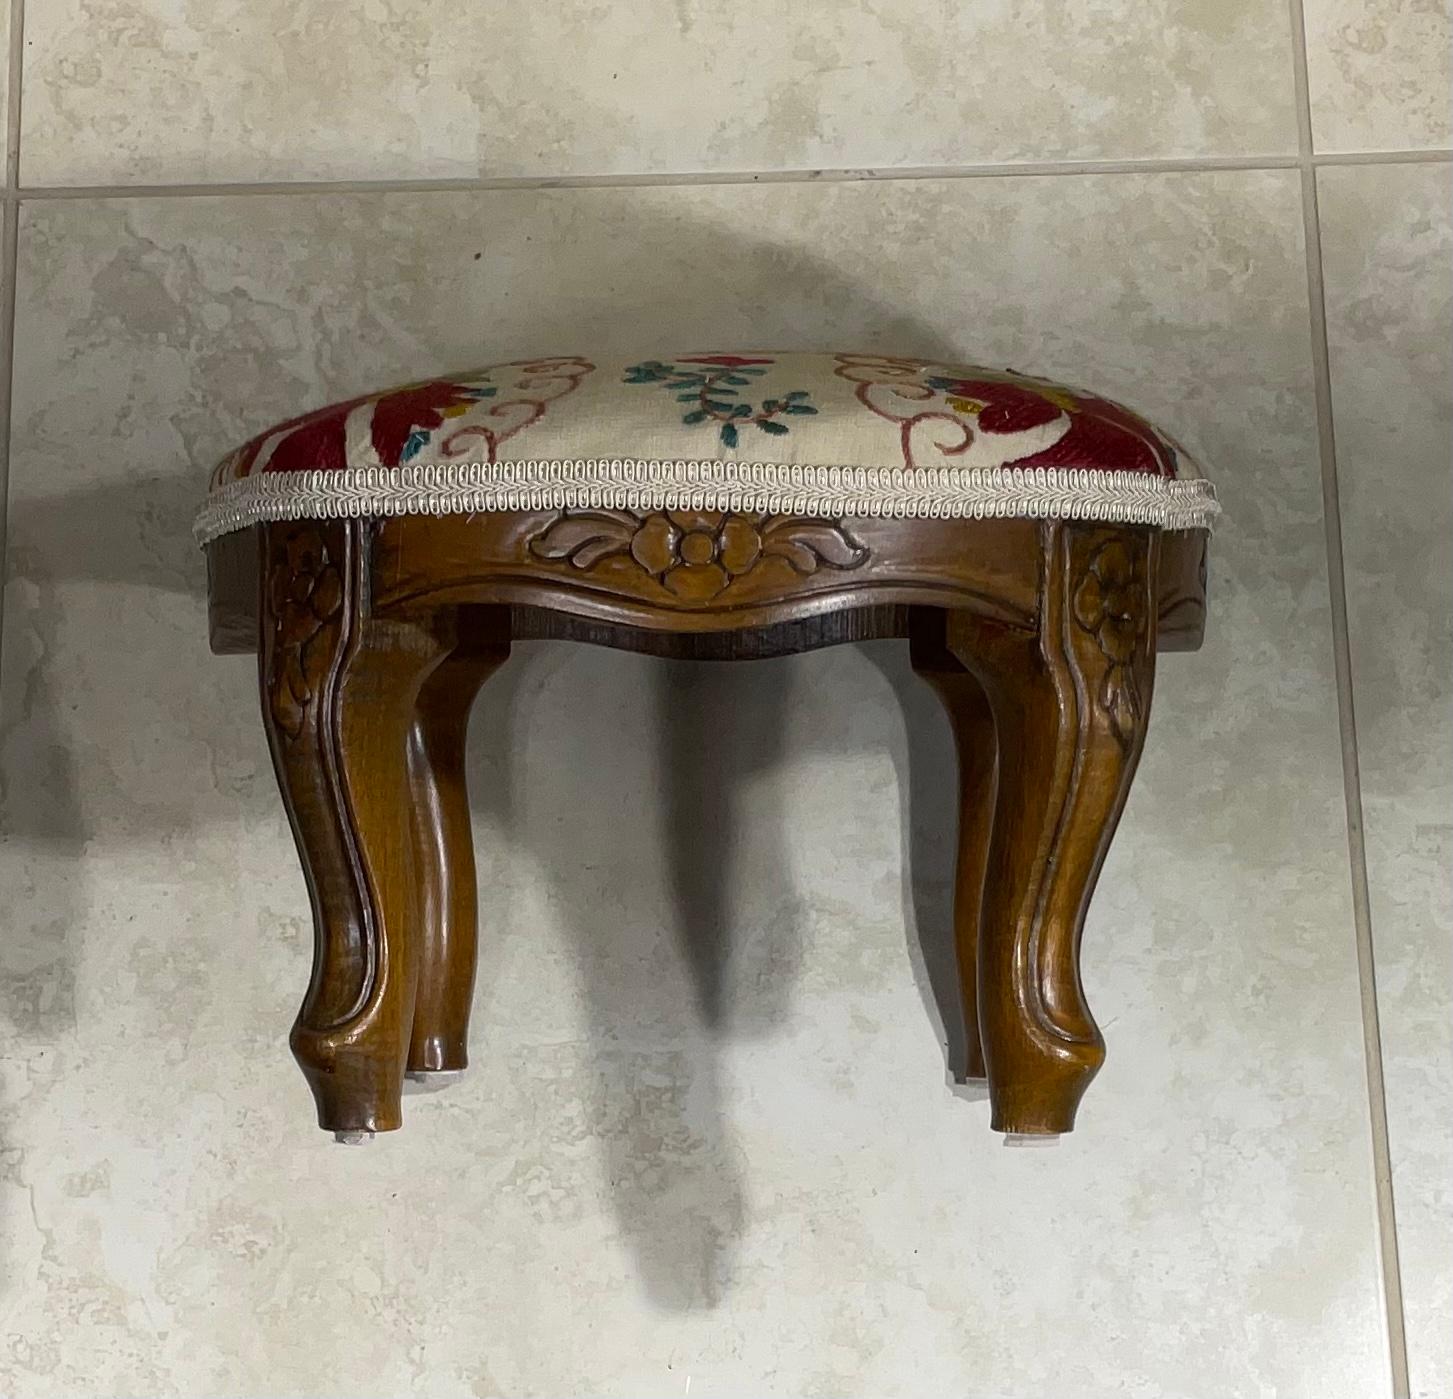 Vintage Suzani Foot Stool In Good Condition For Sale In Delray Beach, FL